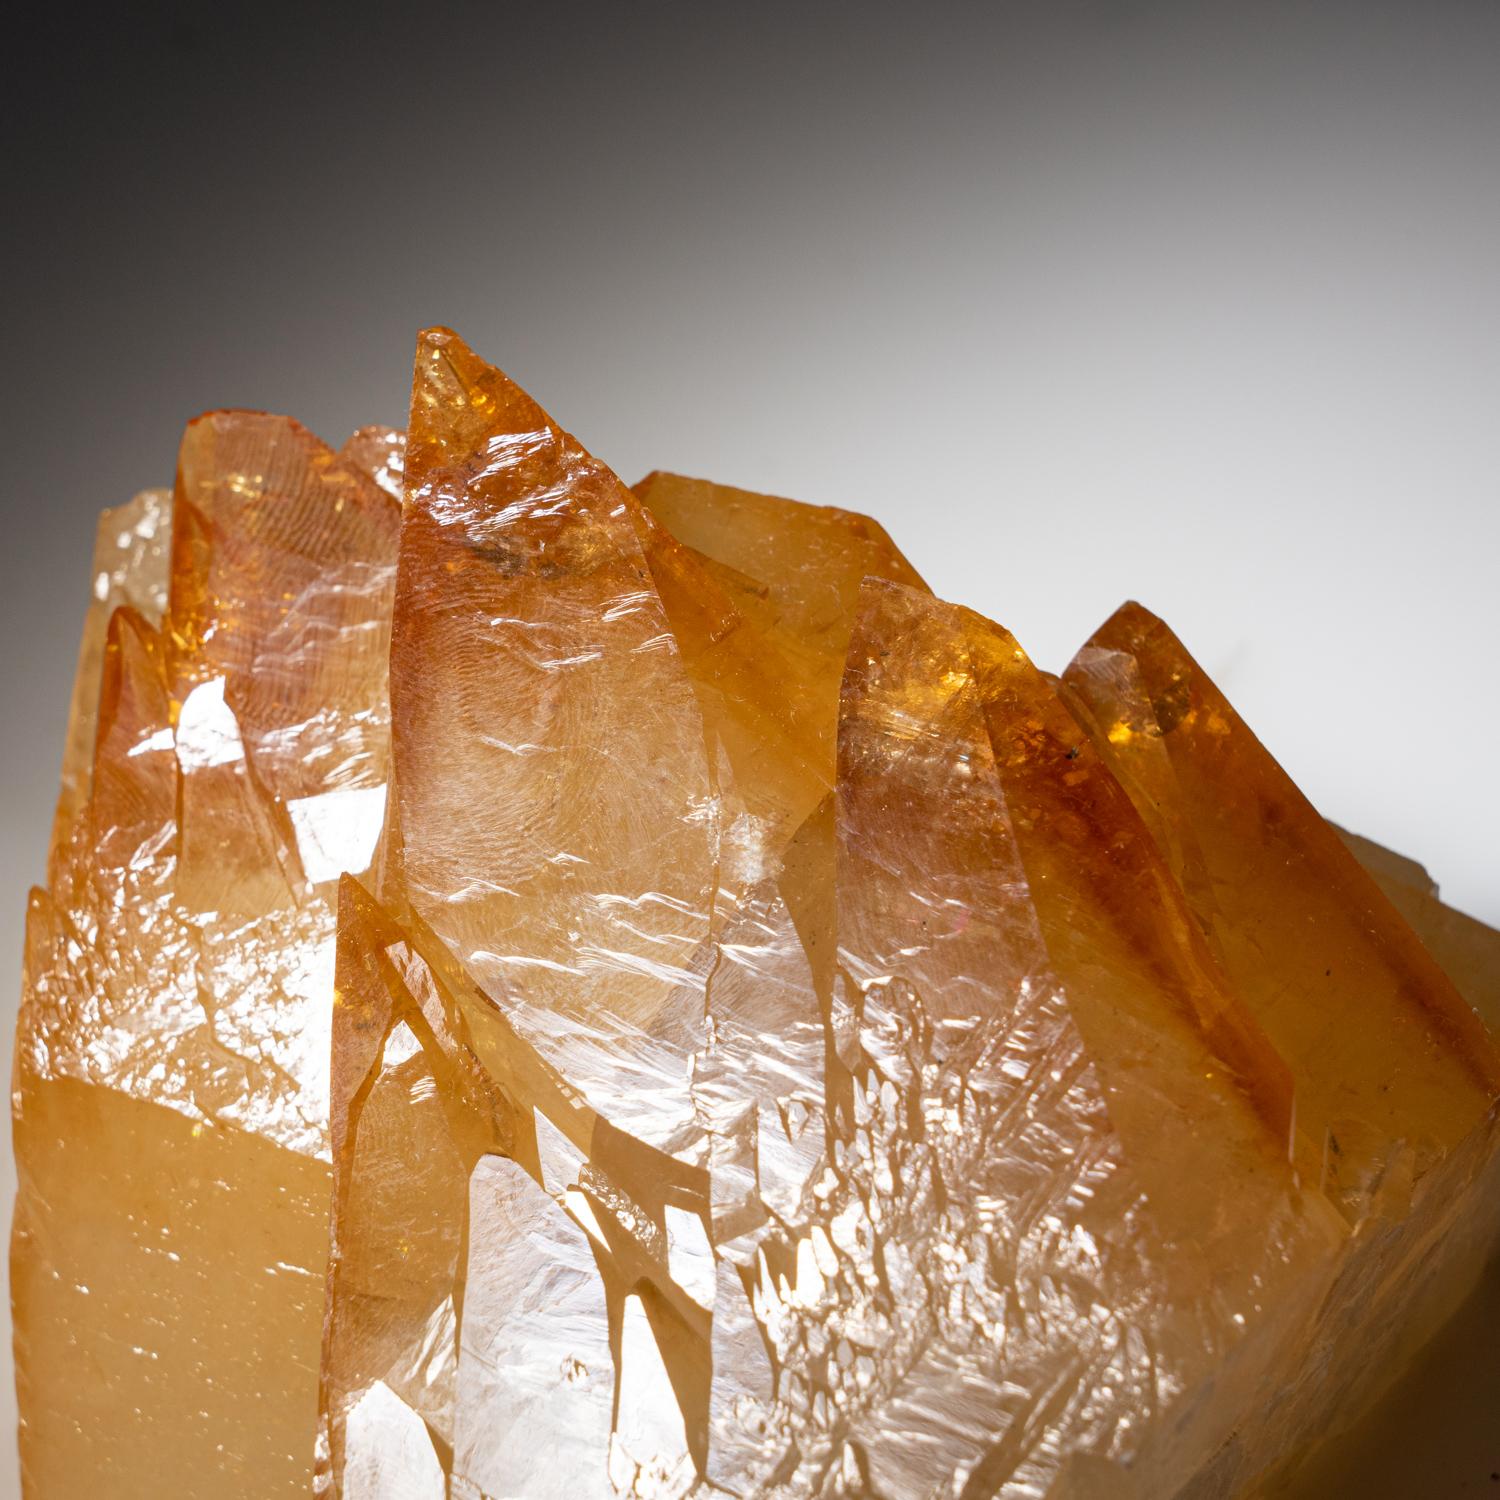 Contemporary Golden Calcite Crystal from Elmwood Mine, Tennessee (2.6 lbs) For Sale